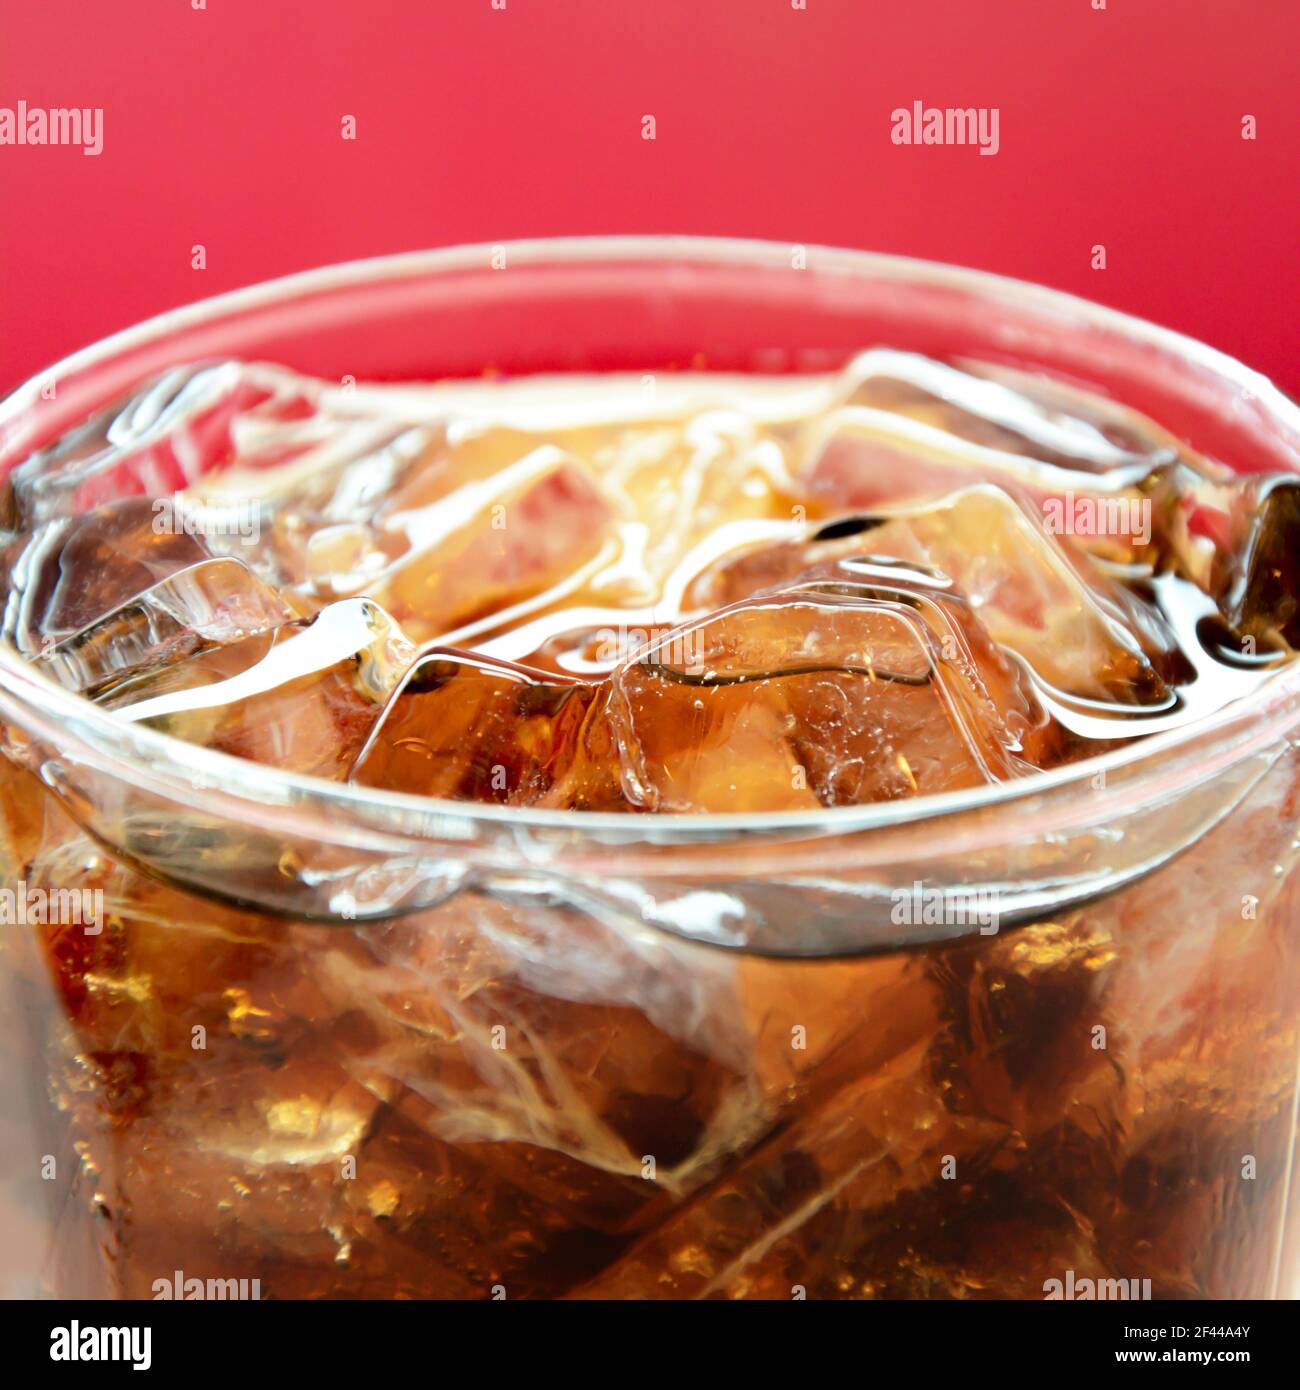 A glass of cola soft drink with ice cubes on red background Stock Photo